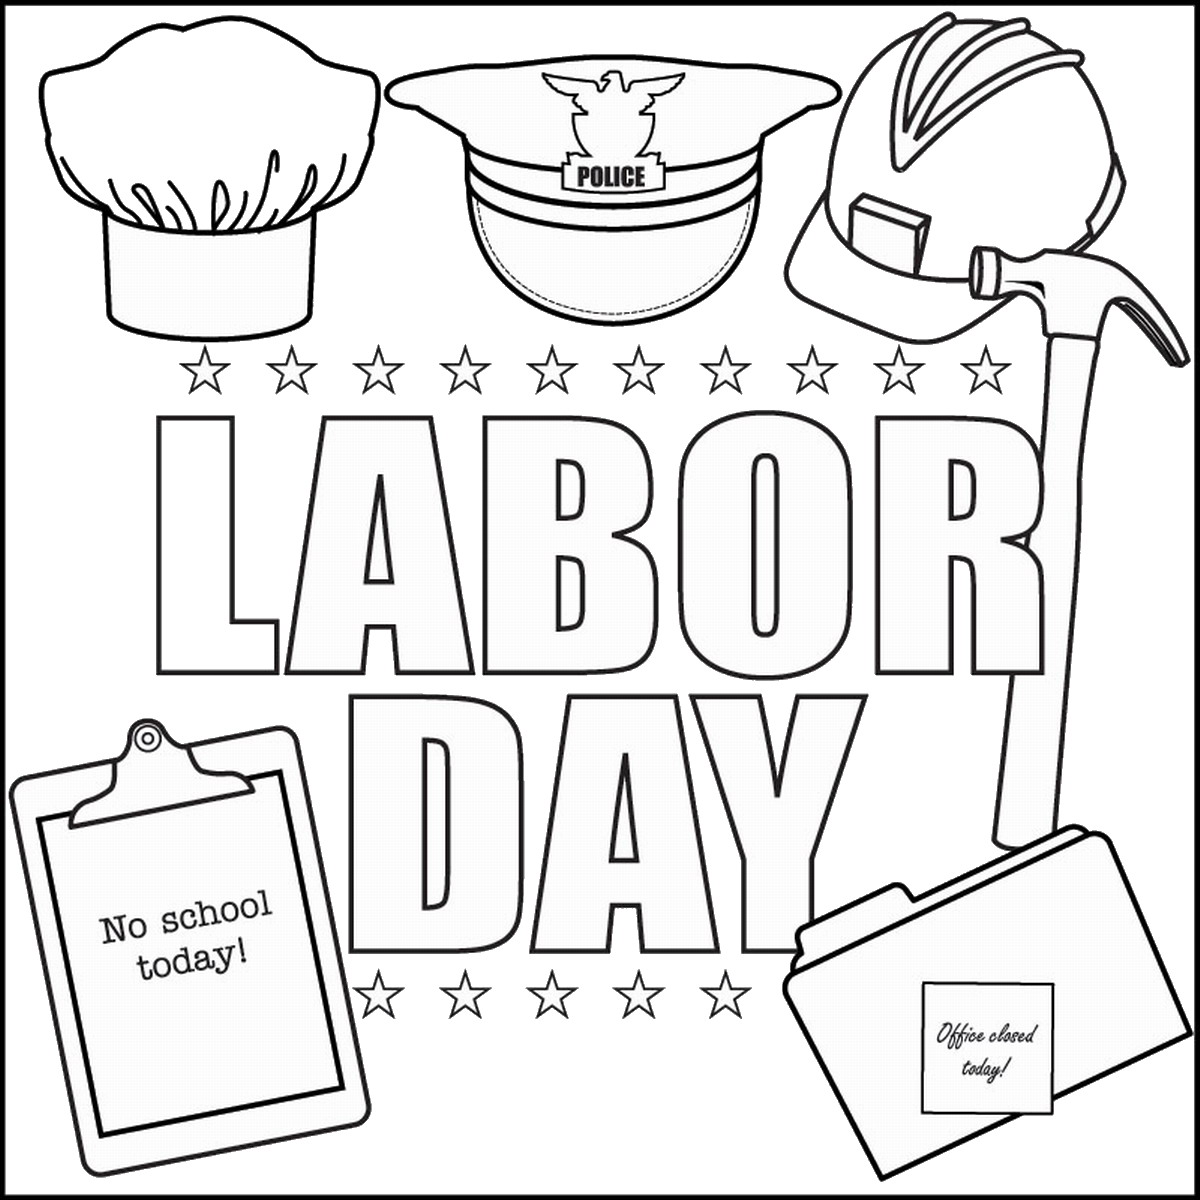 Labor day clipart black and white